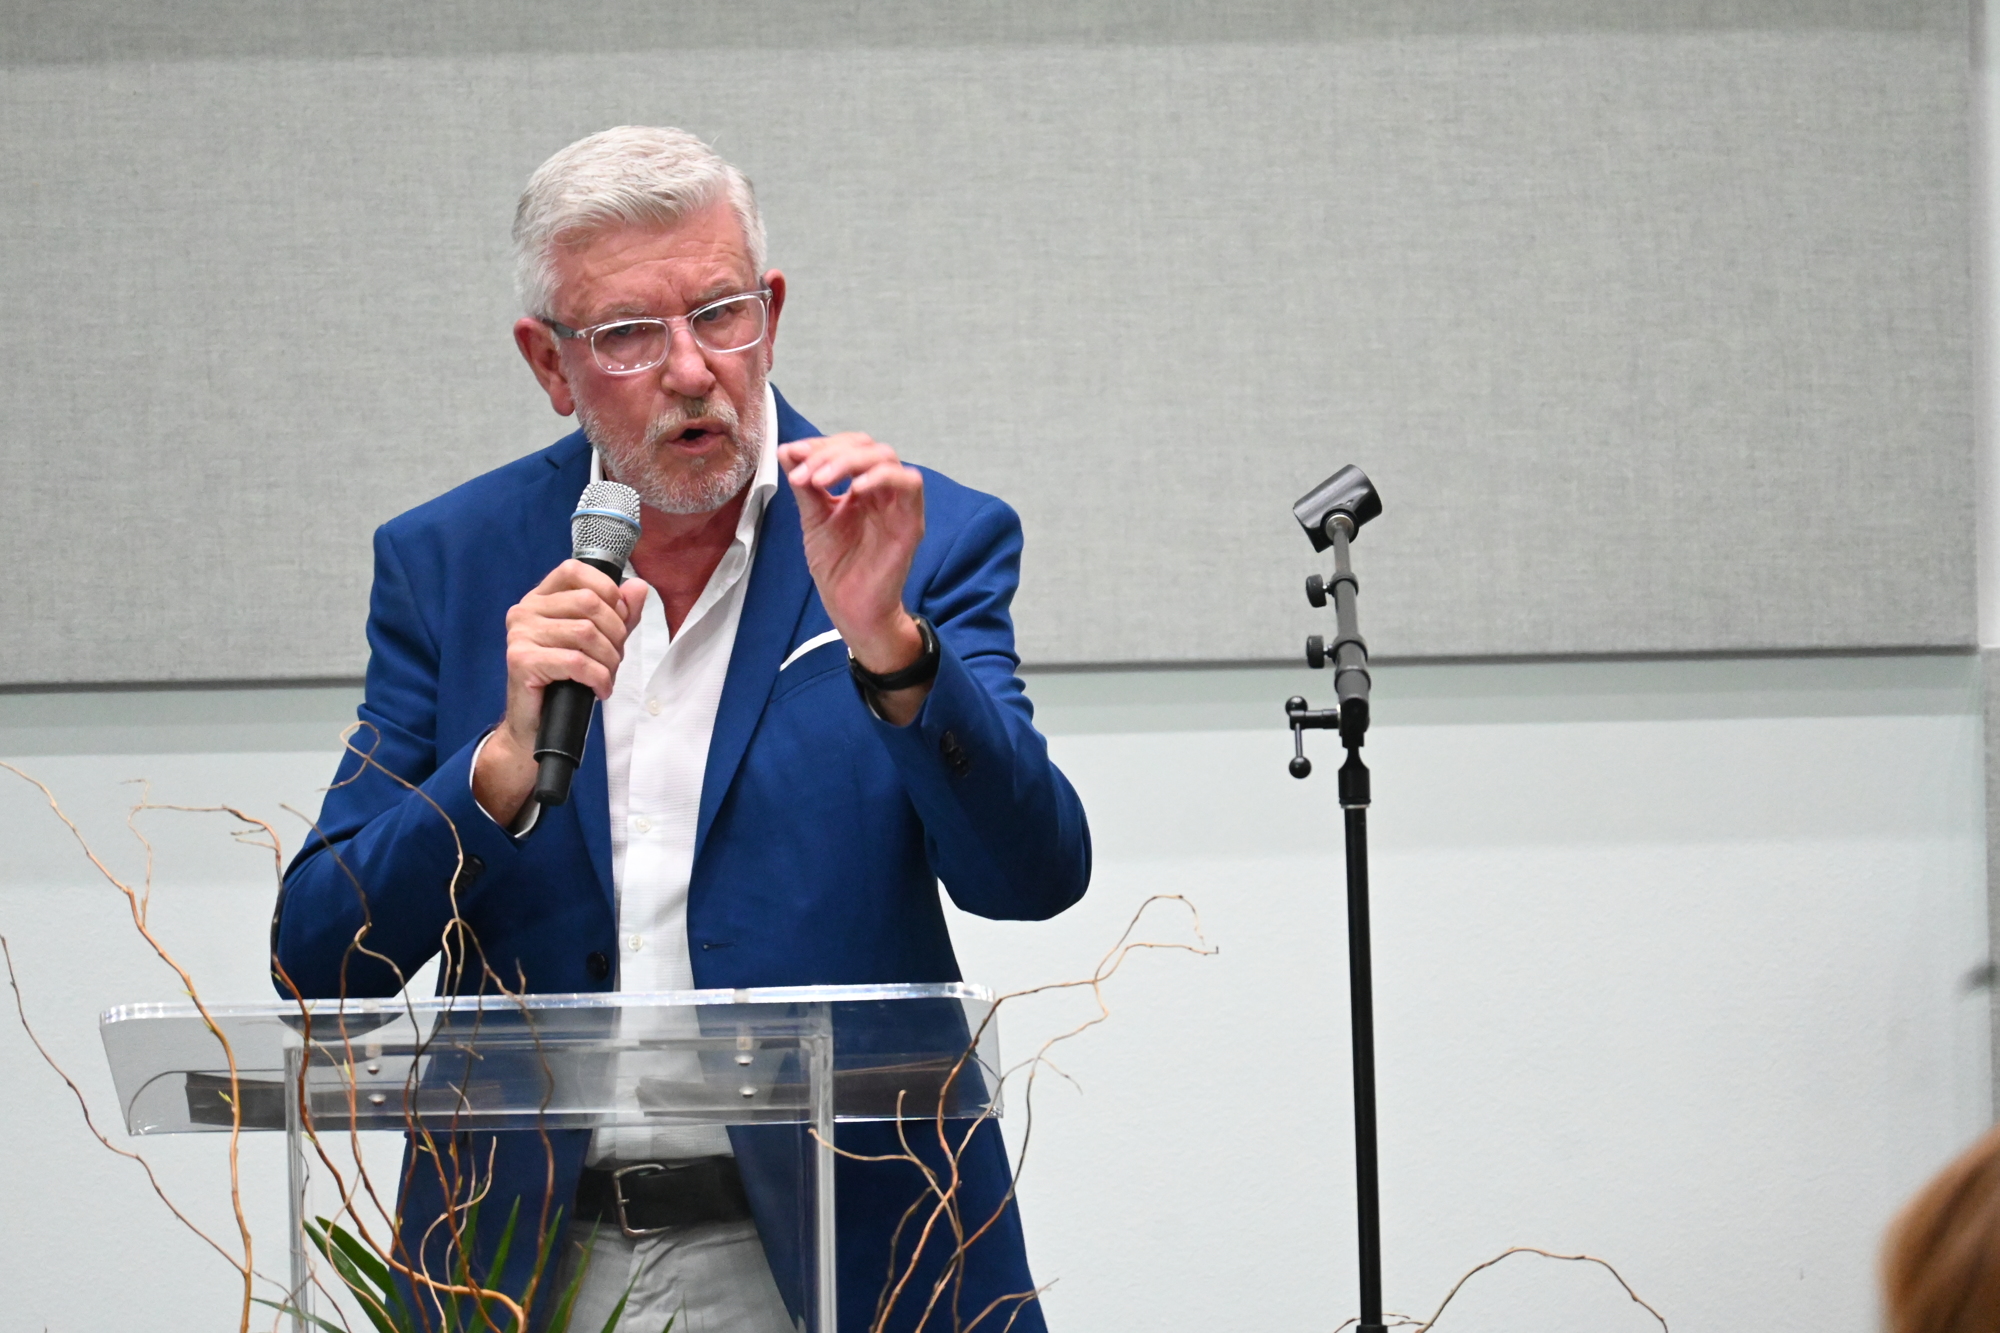 Michael Donald Edwards thanked donors and staff for their involvement in opening the new building at the Koski Production Center. (Photo: Spencer Fordin)